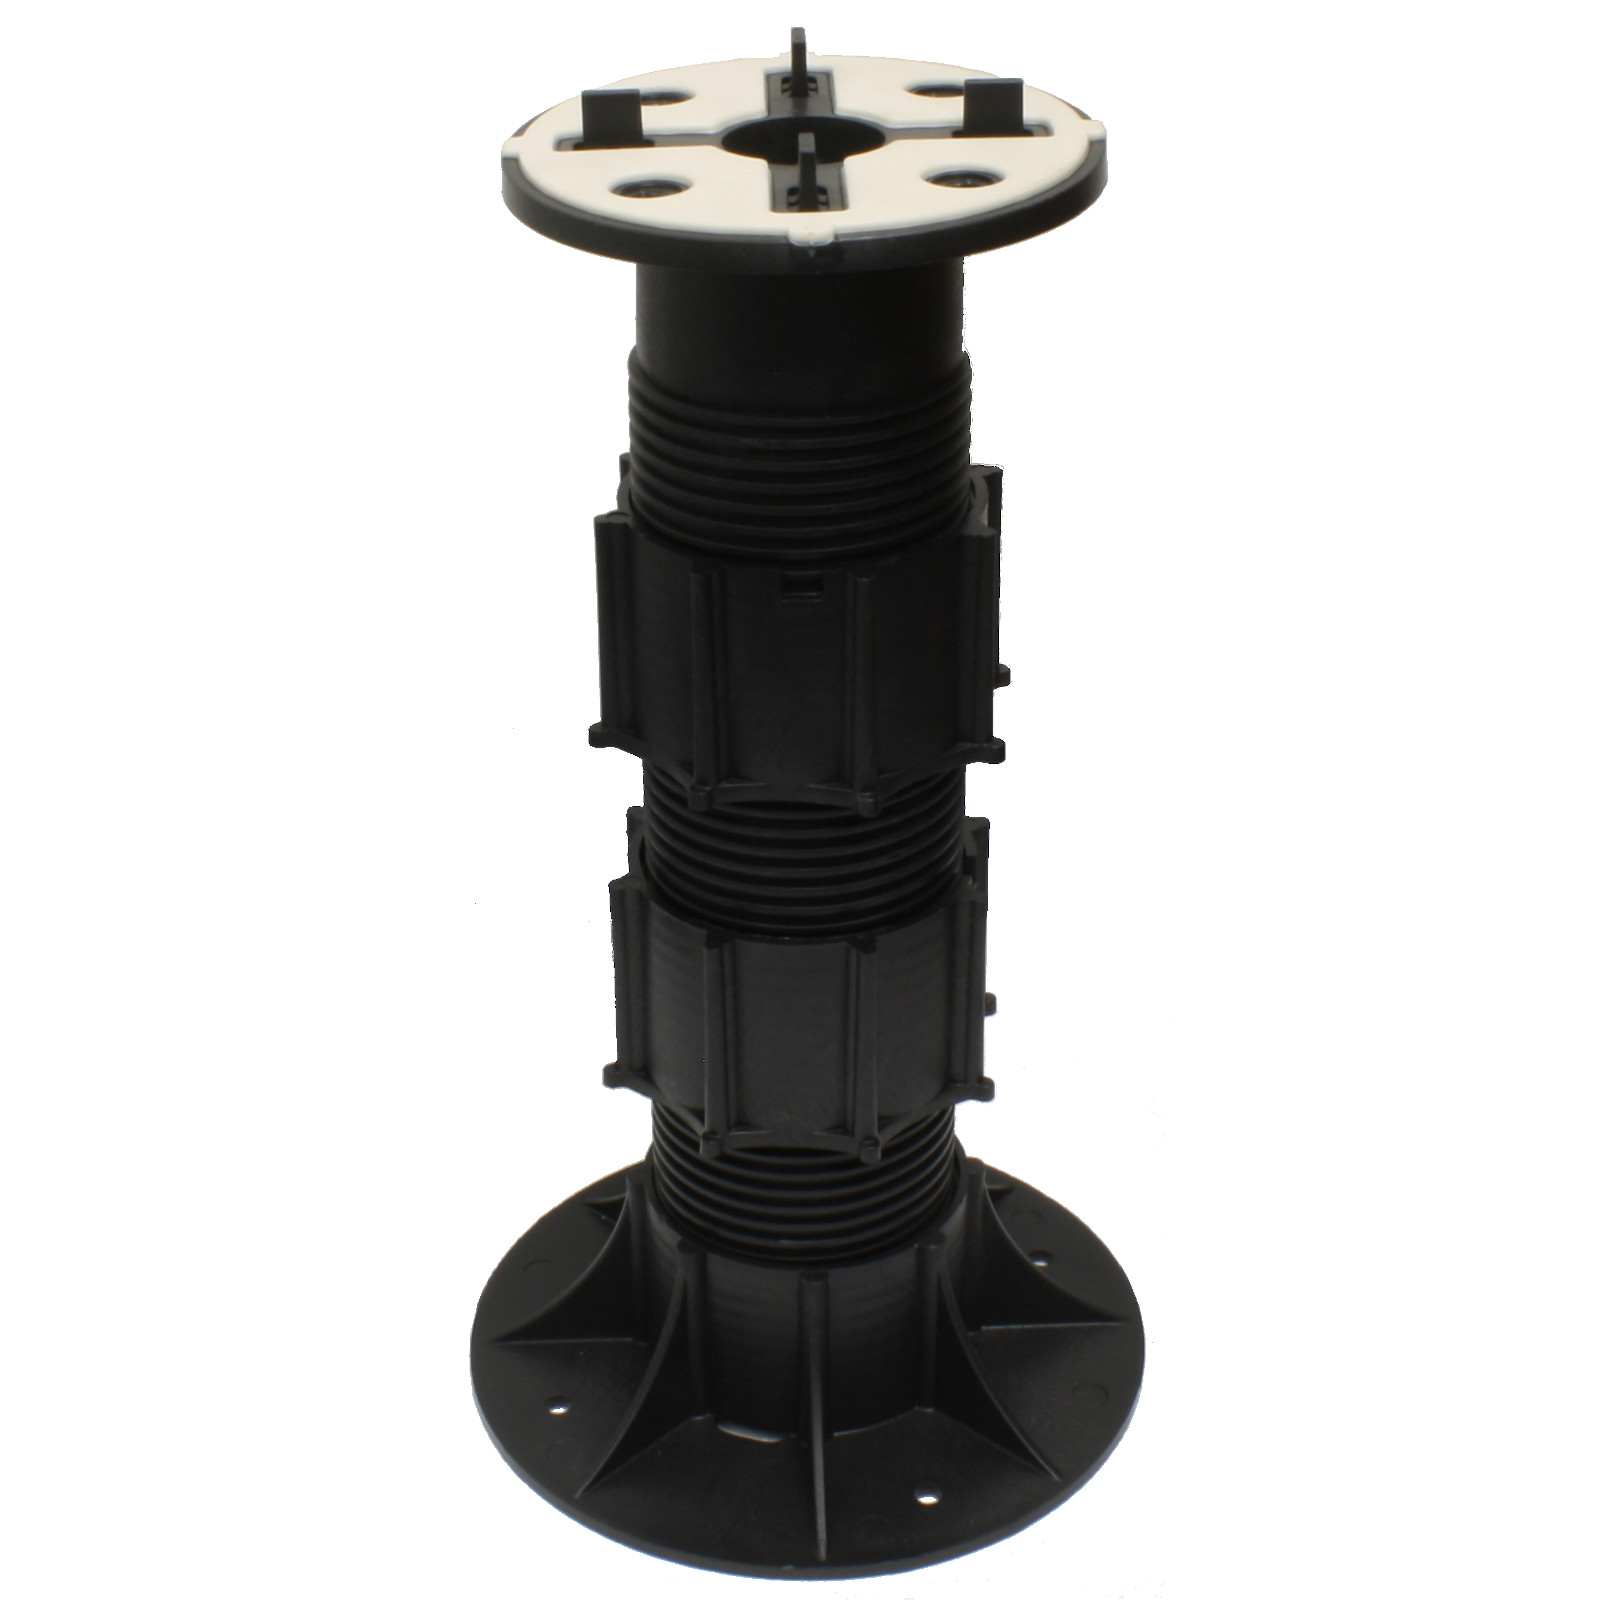 SE10 Adj Ped Support w/ Three-in-One Self Leveling Head 9.875” ‐ 15” (250‐385Mm)